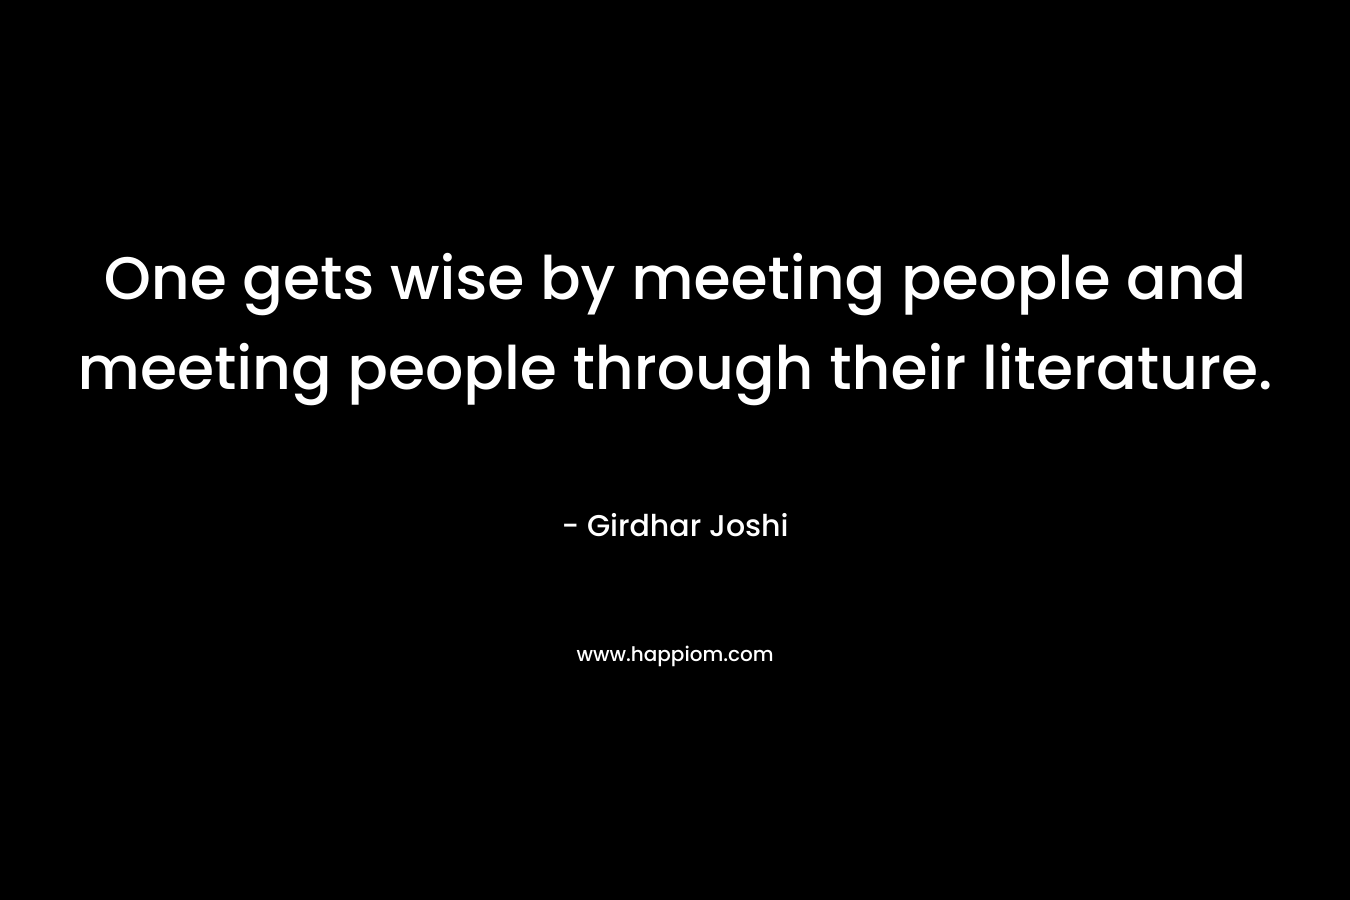 One gets wise by meeting people and meeting people through their literature.